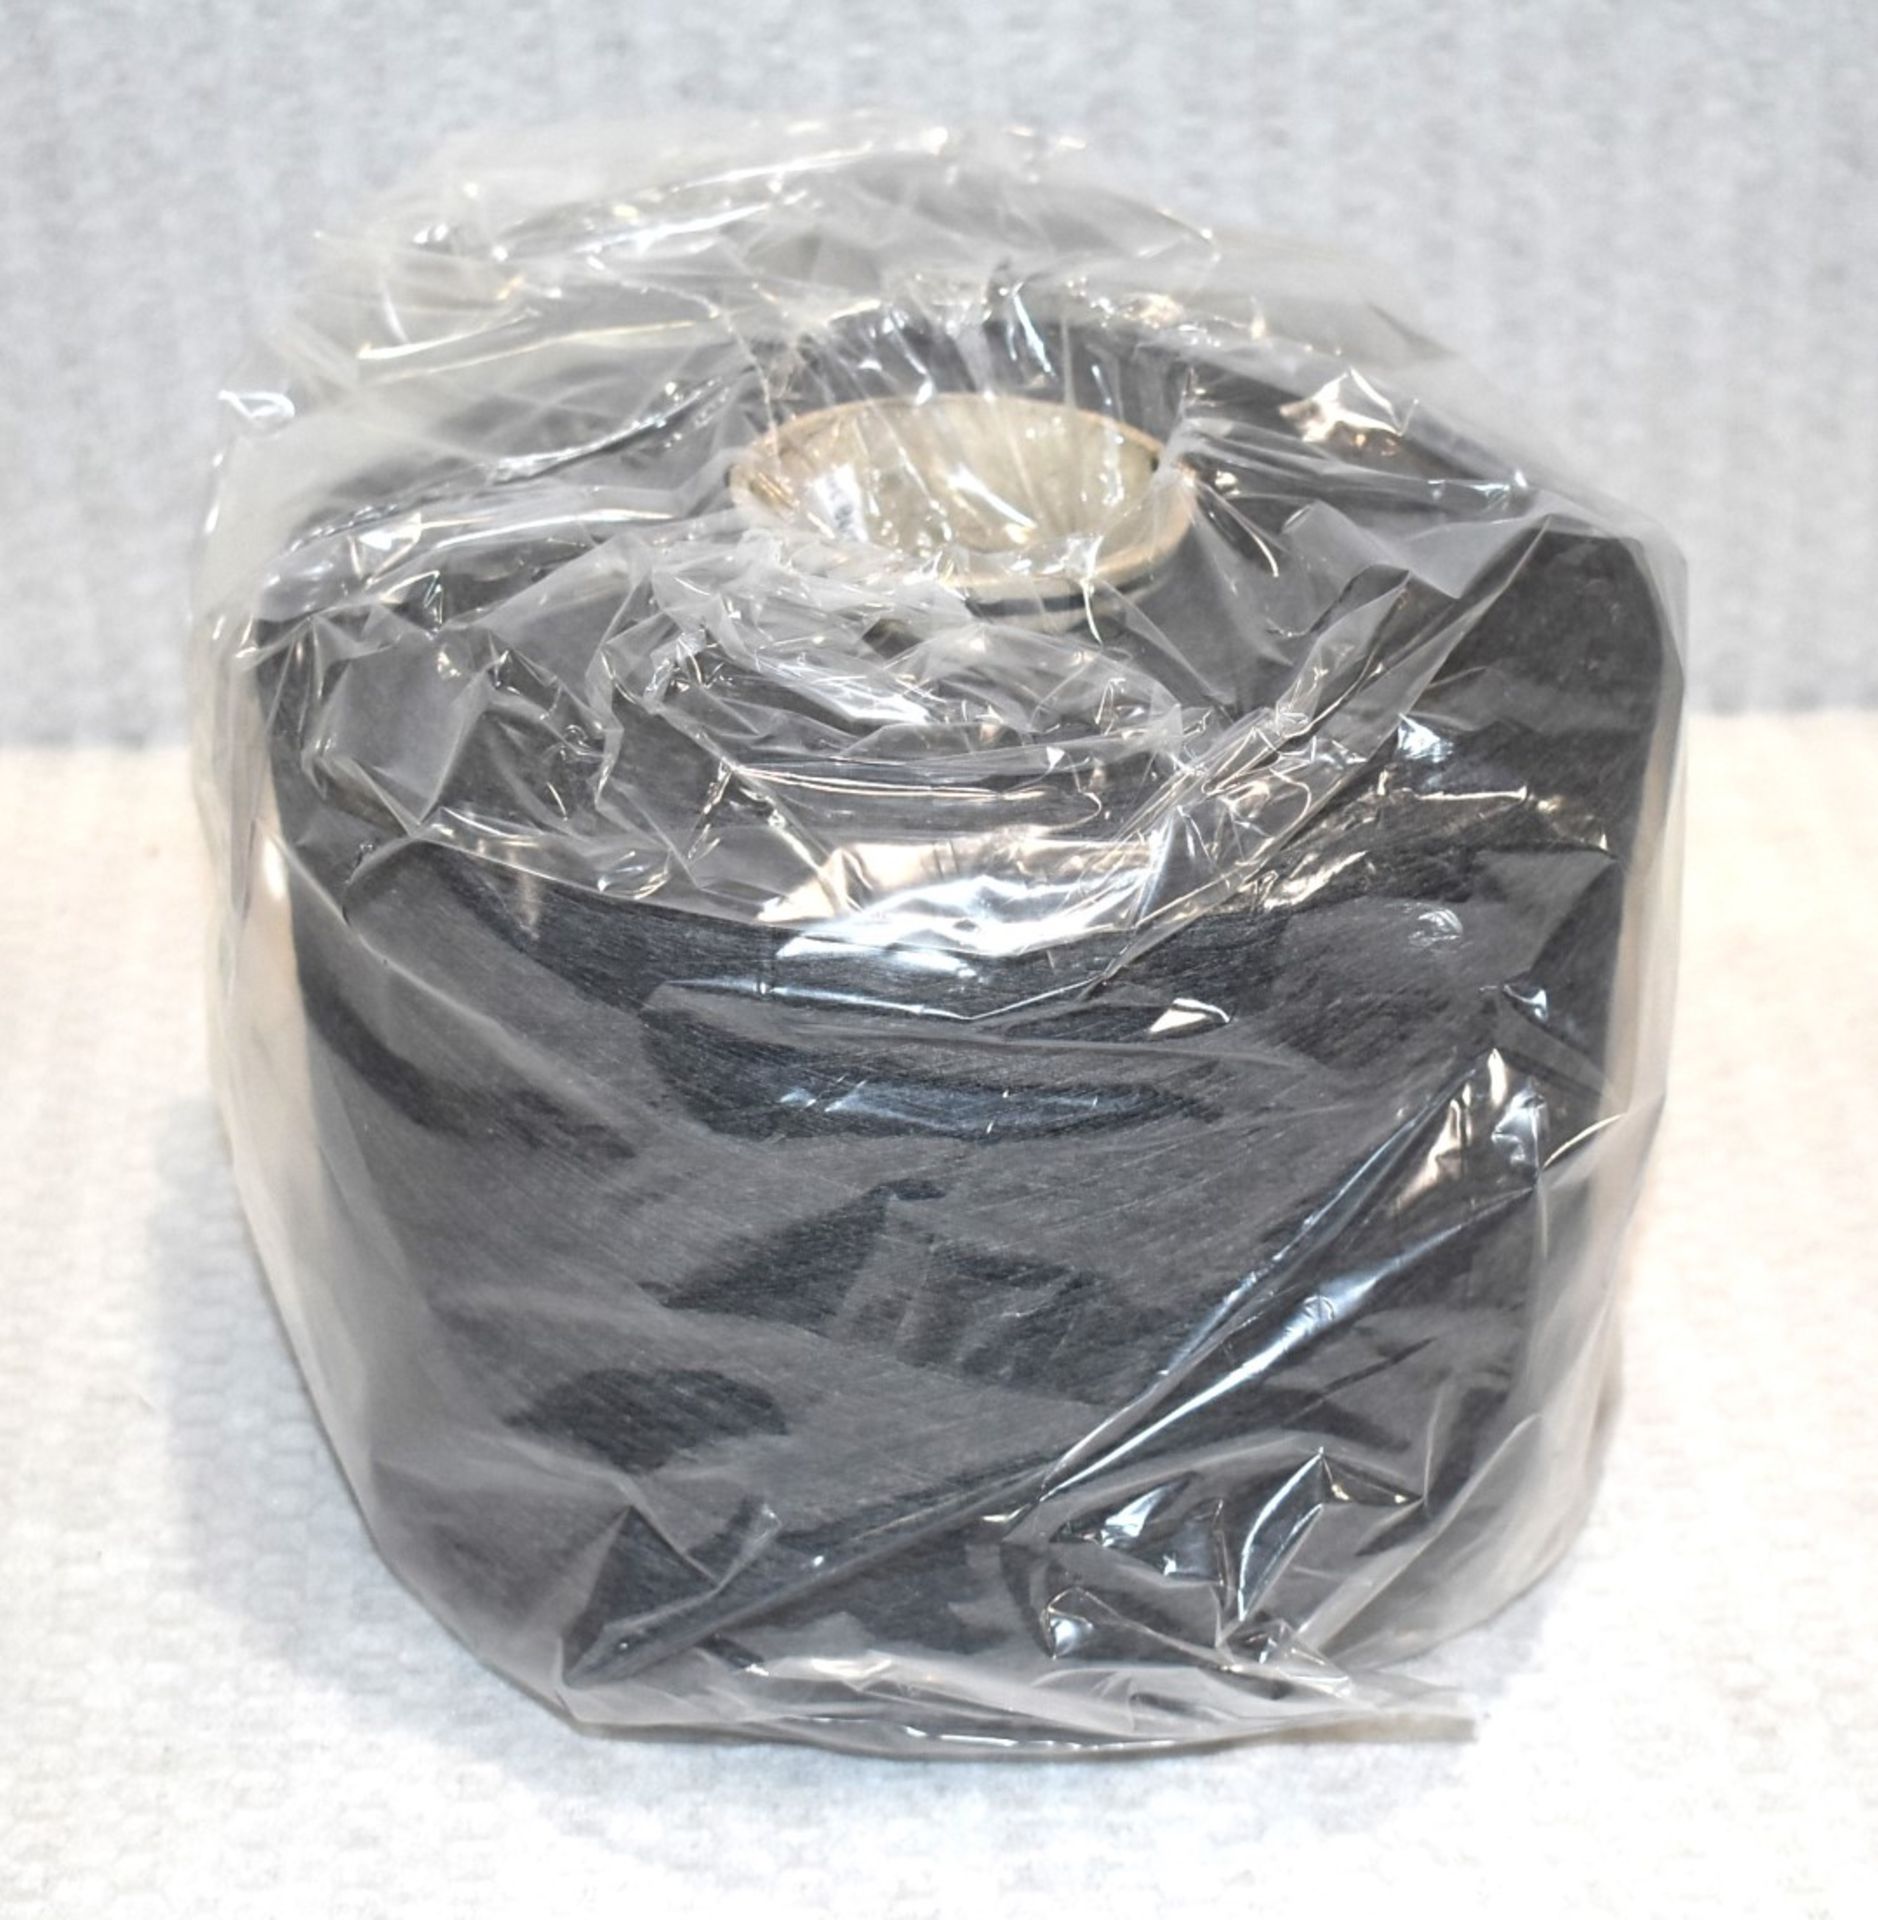 10 x Cones of 1/13 MicroCotton Knitting Yarn - Mid Grey - Approx Weight: 2,500g - New Stock ABL Yarn - Image 14 of 18